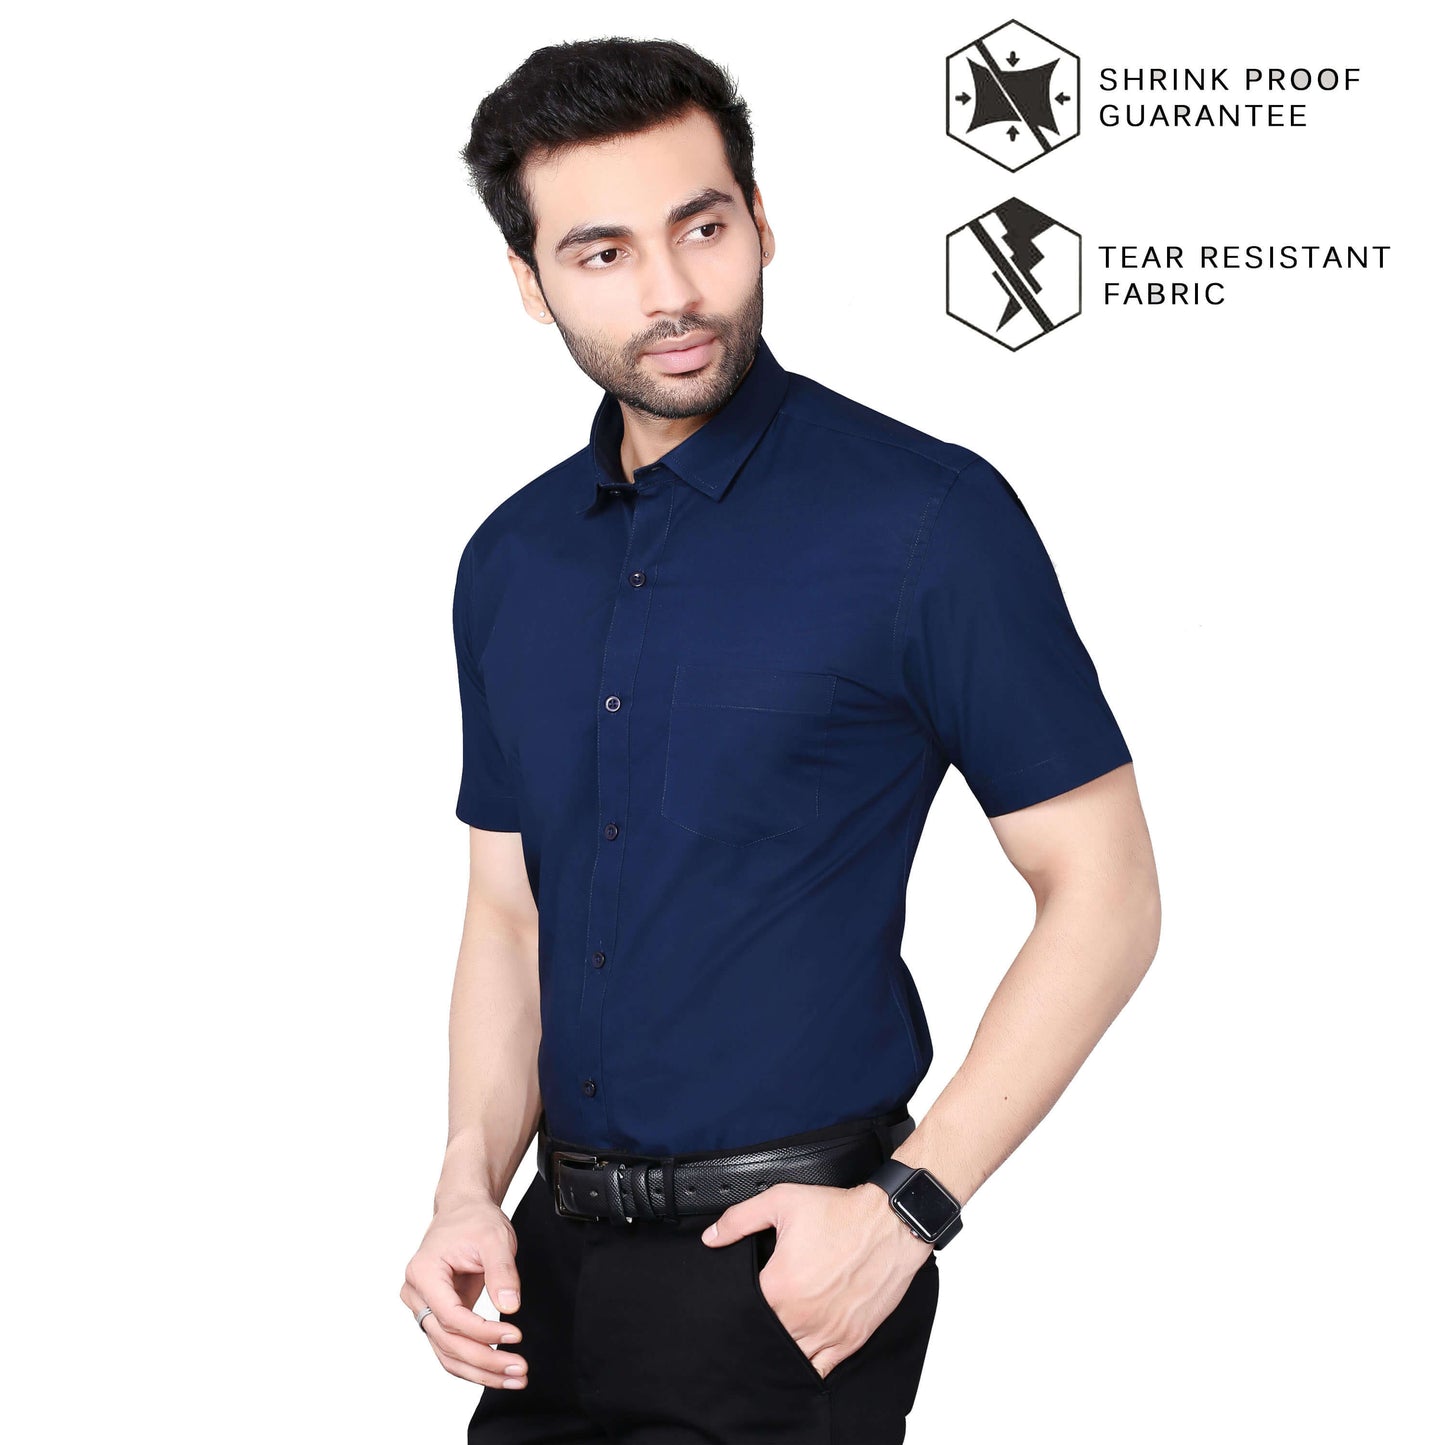 5thanfold Men's Formal Pure Cotton Half Sleeve Solid Light Navy Slim Fit Shirt